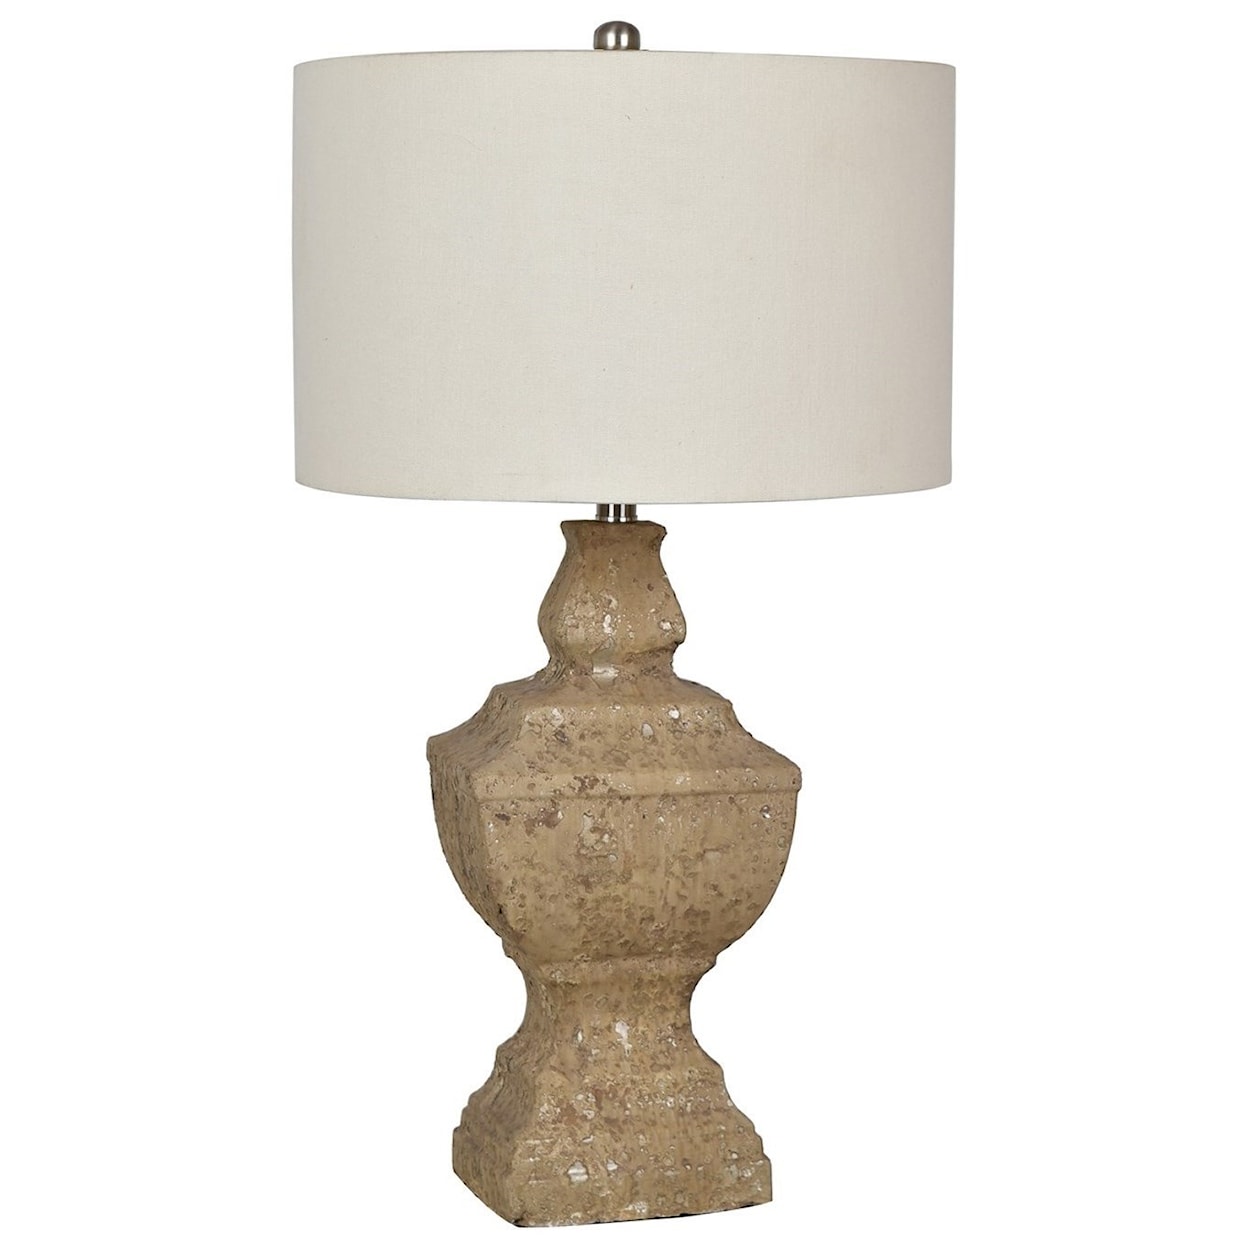 Crestview Collection Lighting Stone County Table Lamp